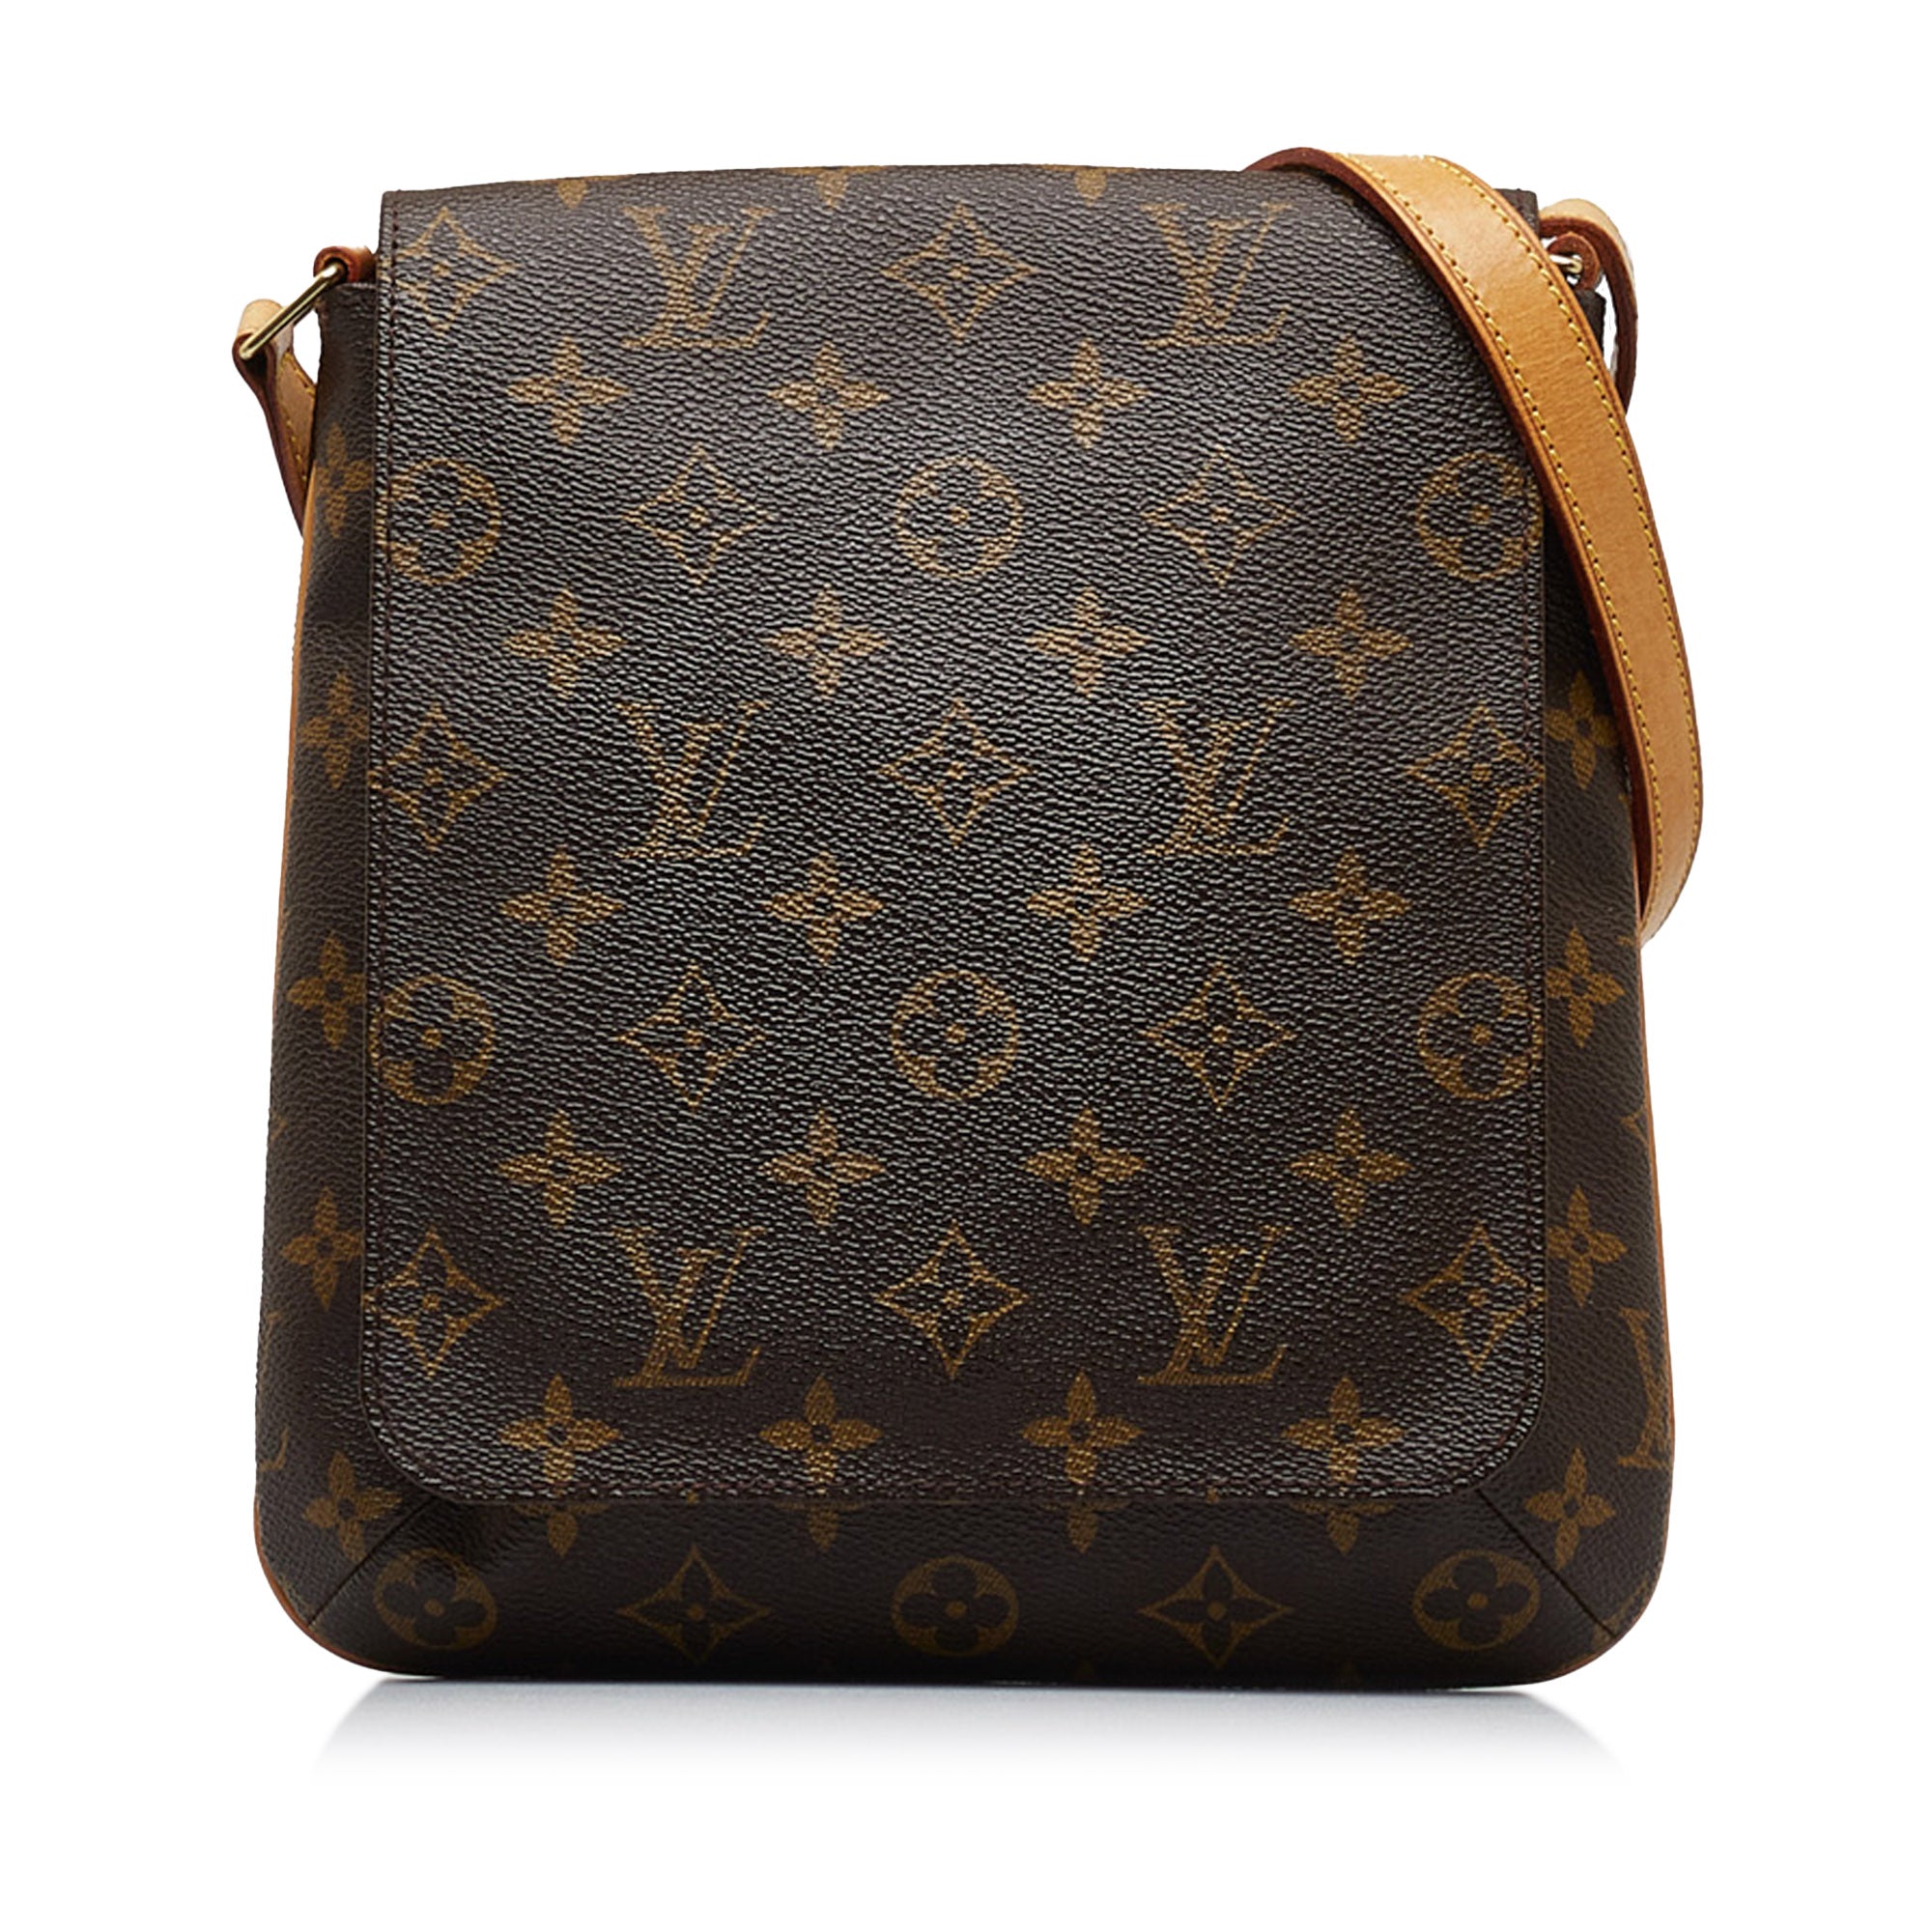 Louis Vuitton Musette Salsa Magnetic Bags & Handbags for Women, Authenticity Guaranteed